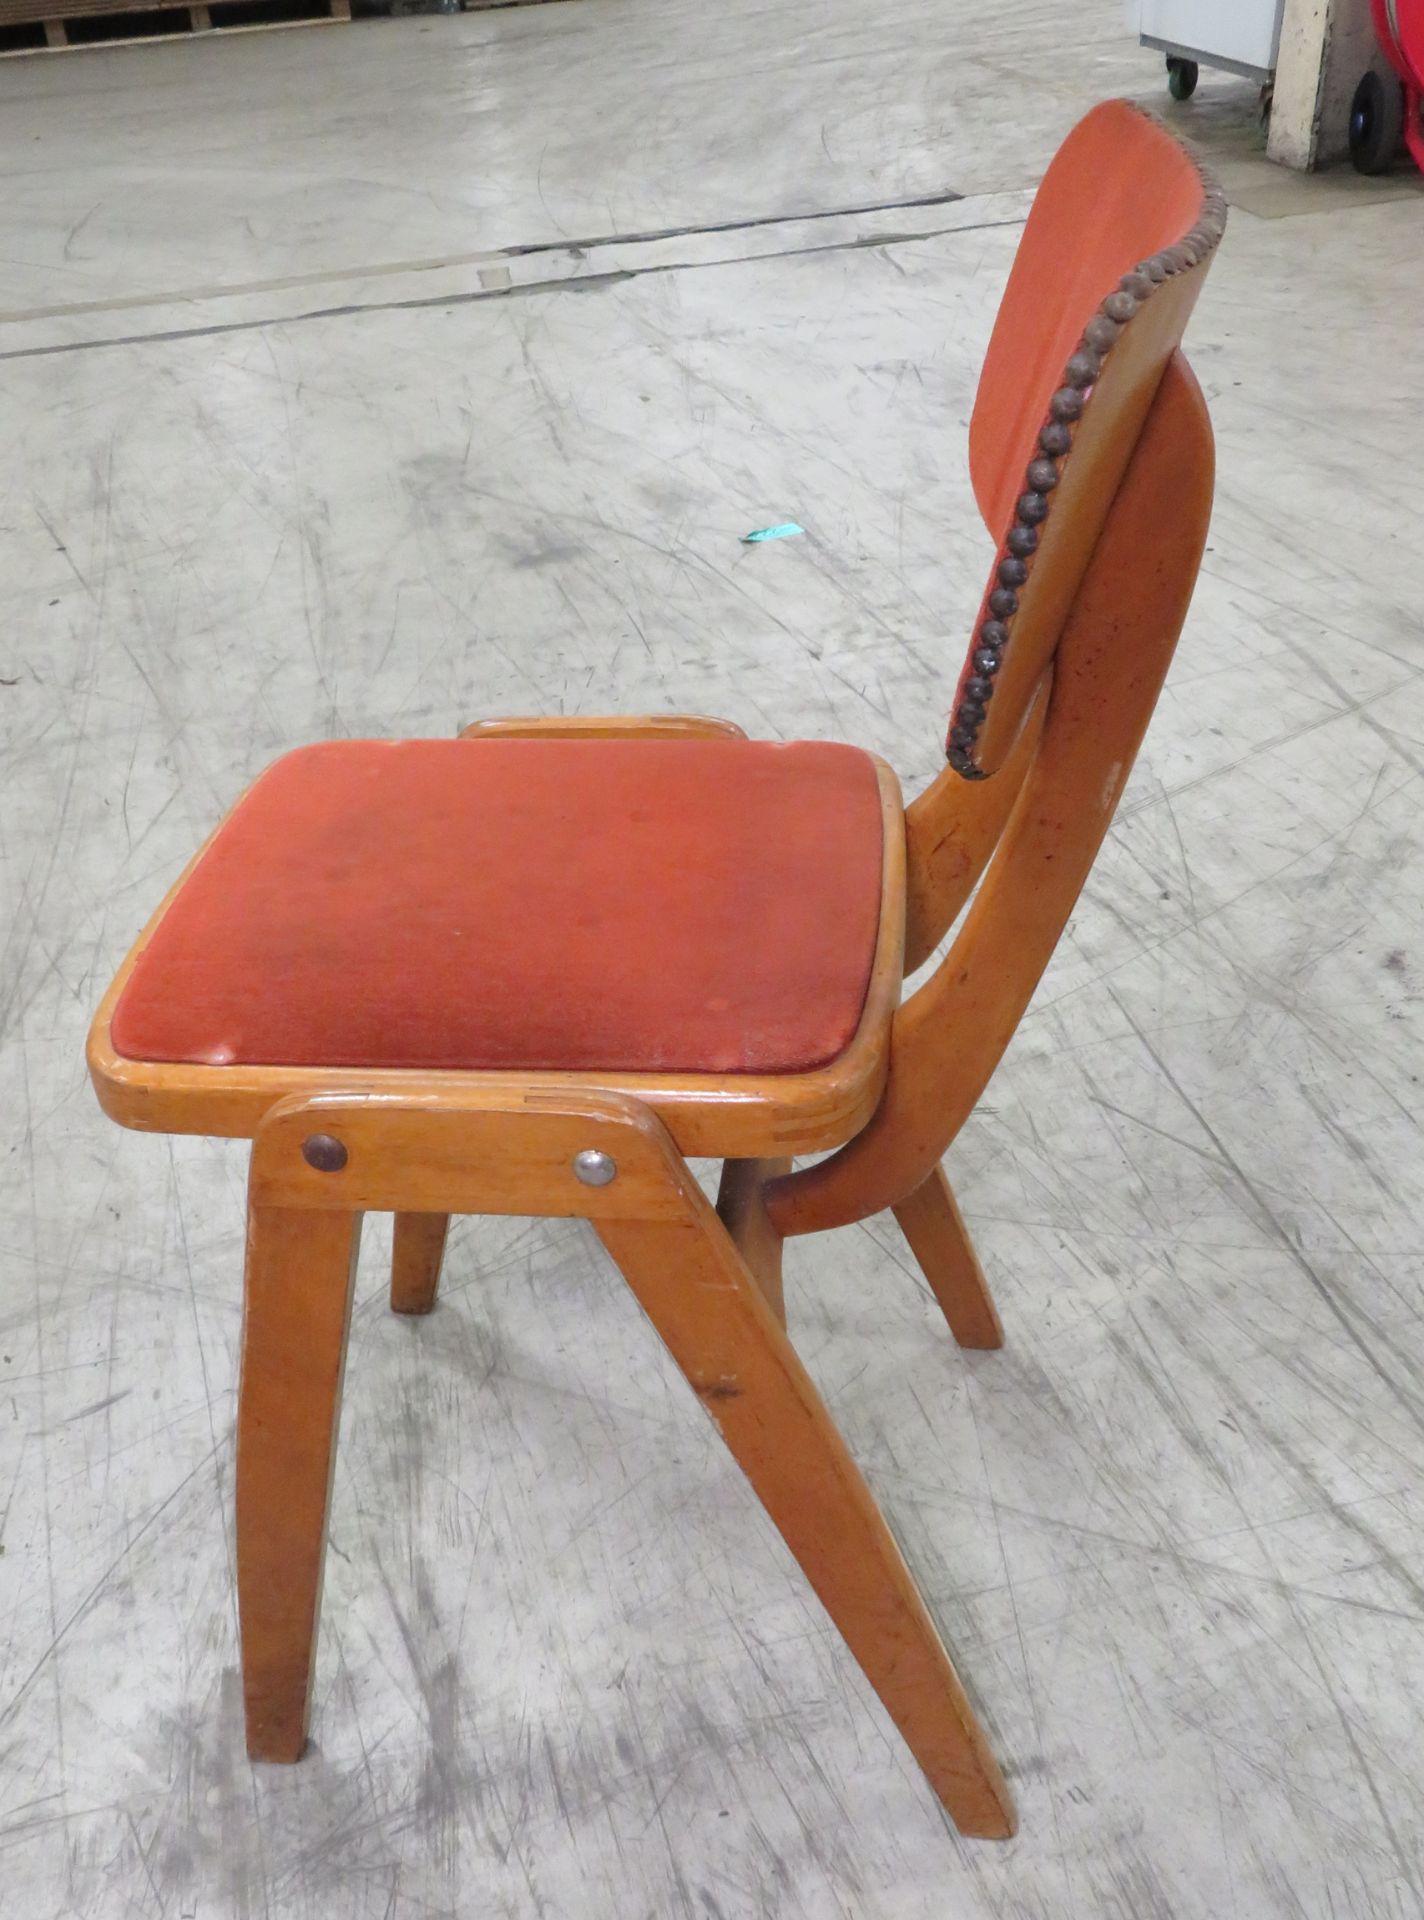 30x Chair with padded seats - seat height 45cm - Image 4 of 4